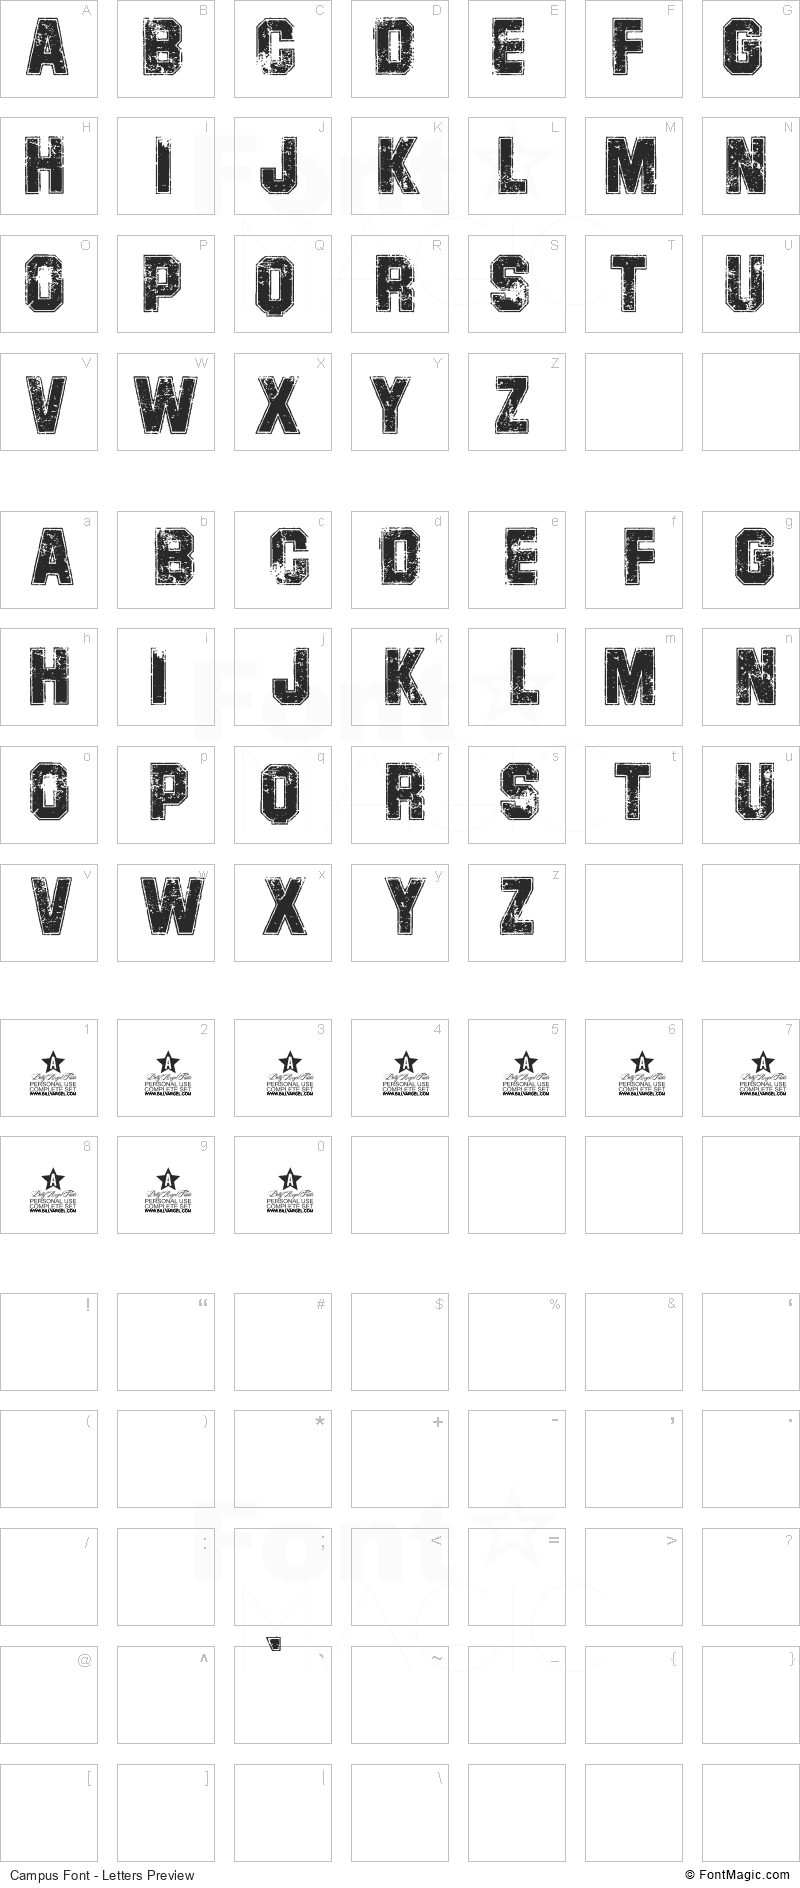 Campus Font - All Latters Preview Chart